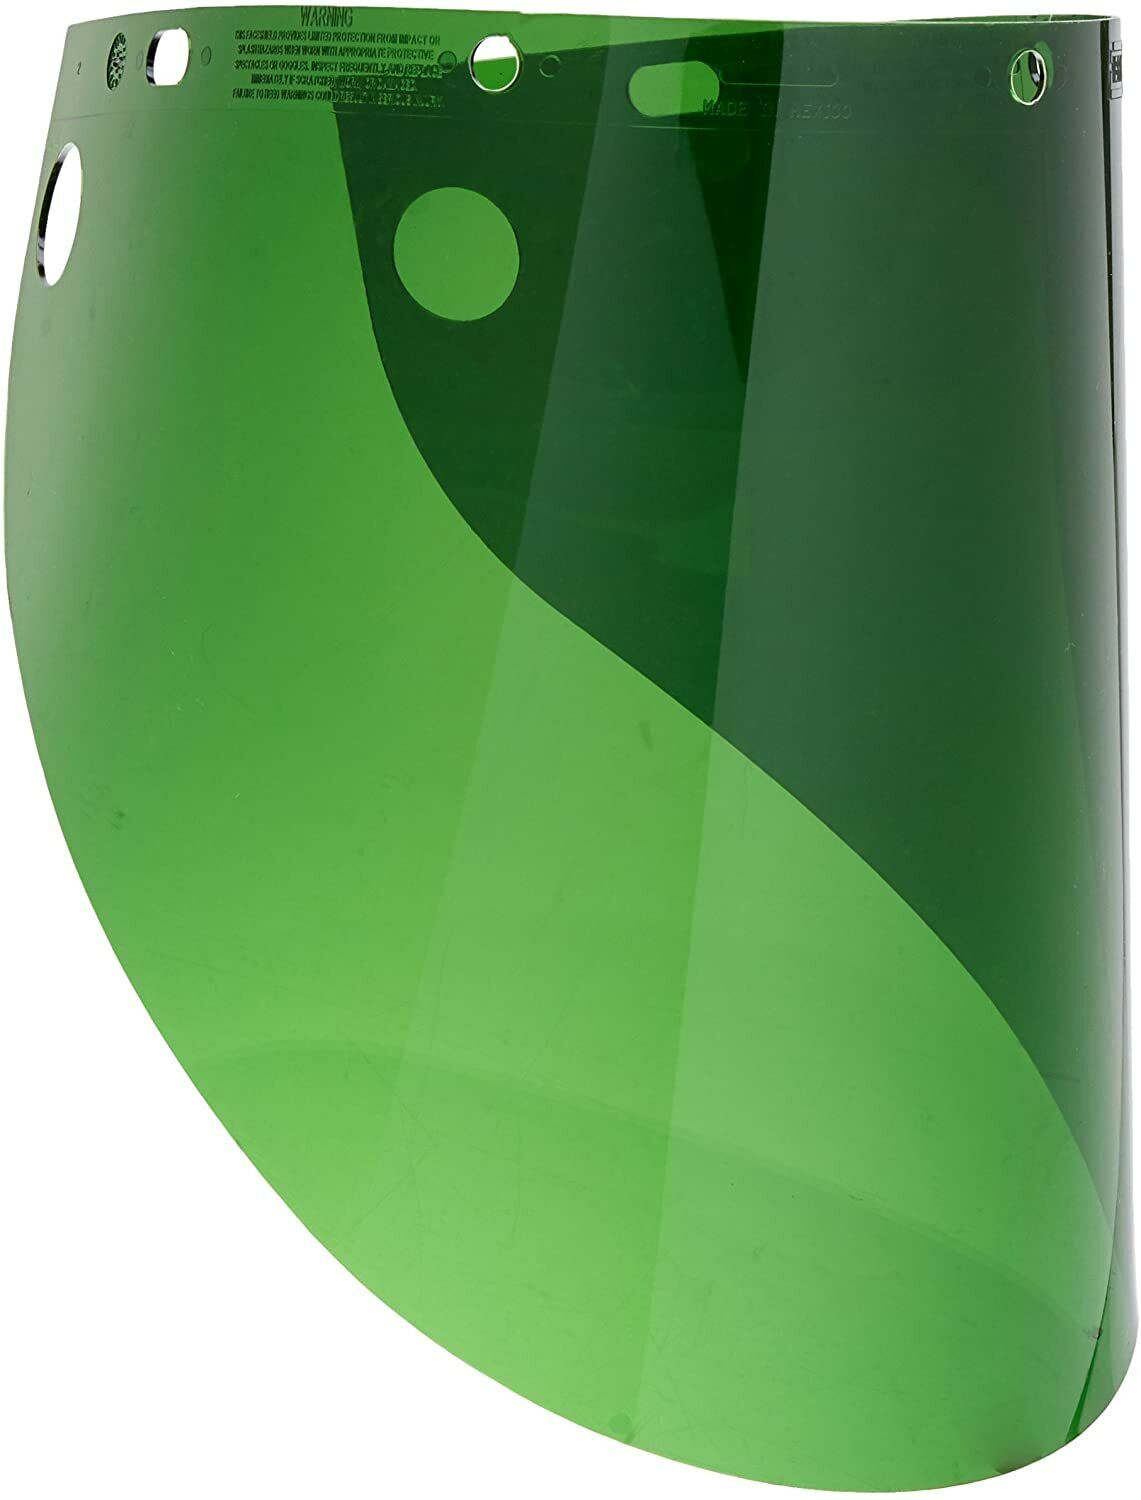 Extended View Faceshield Window, Dark Green, 9 3/4" X 19", Replacement Lens